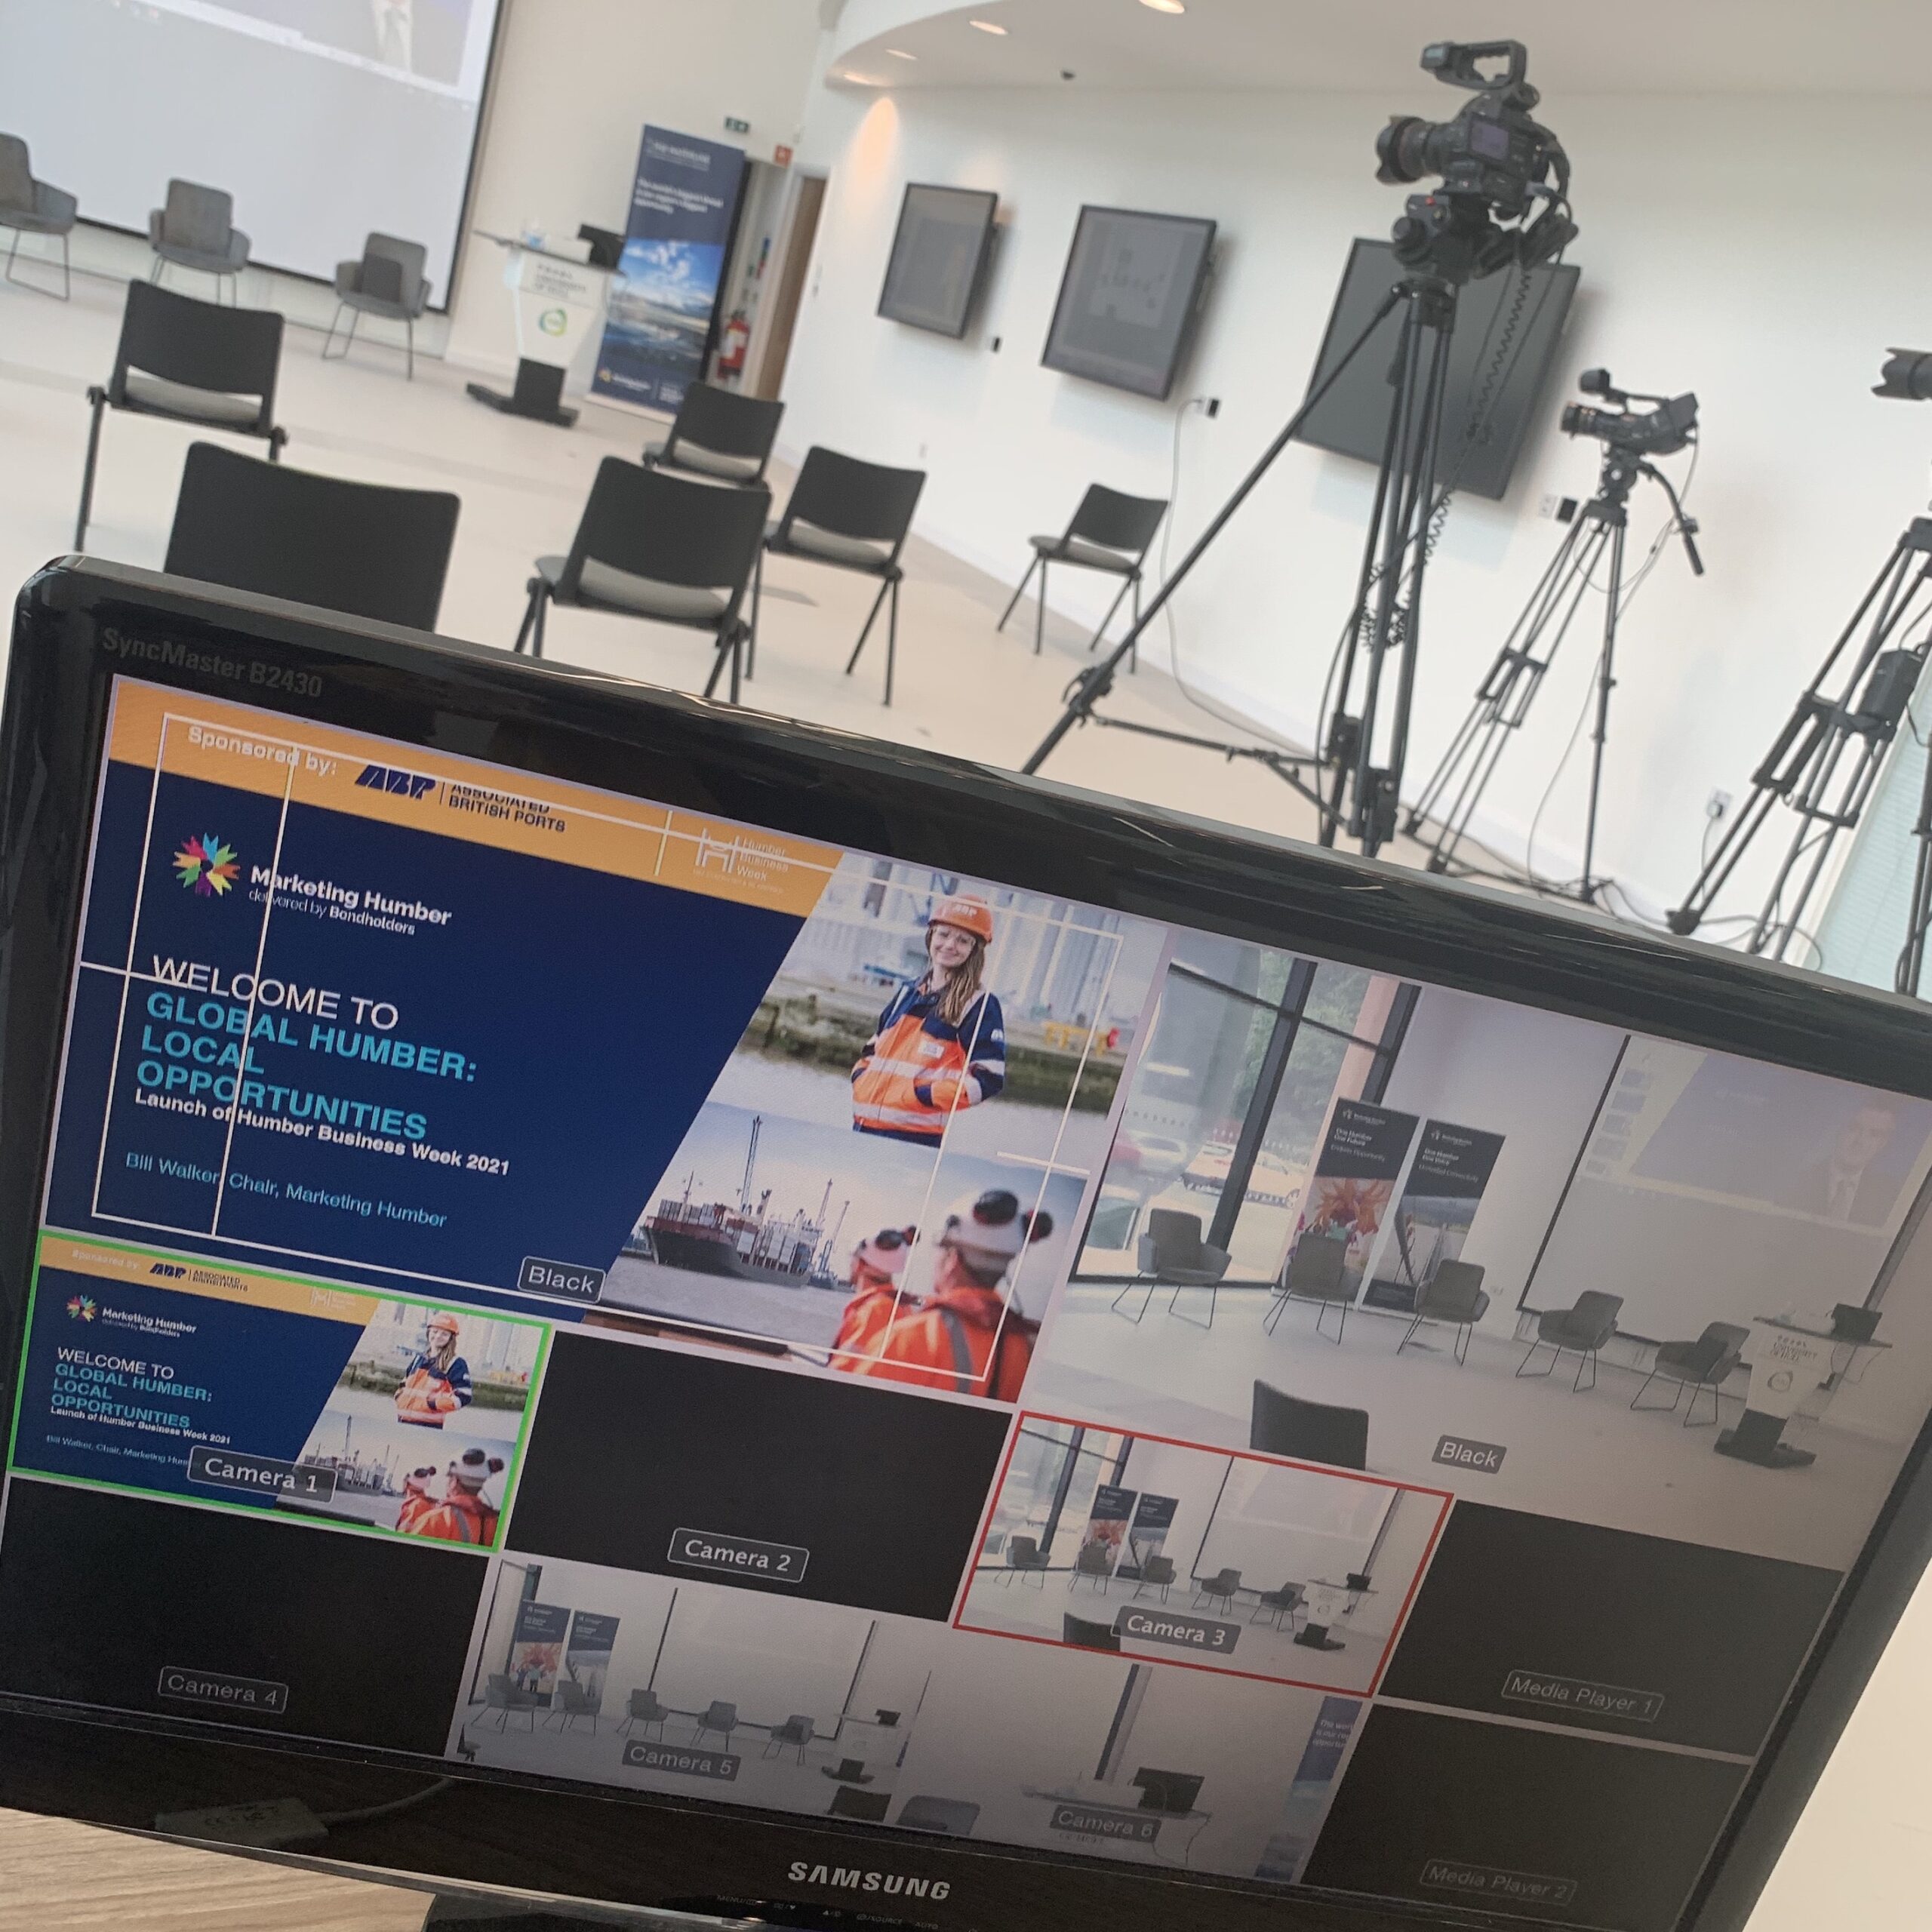 Live Streaming the Launch of Humber Business Week